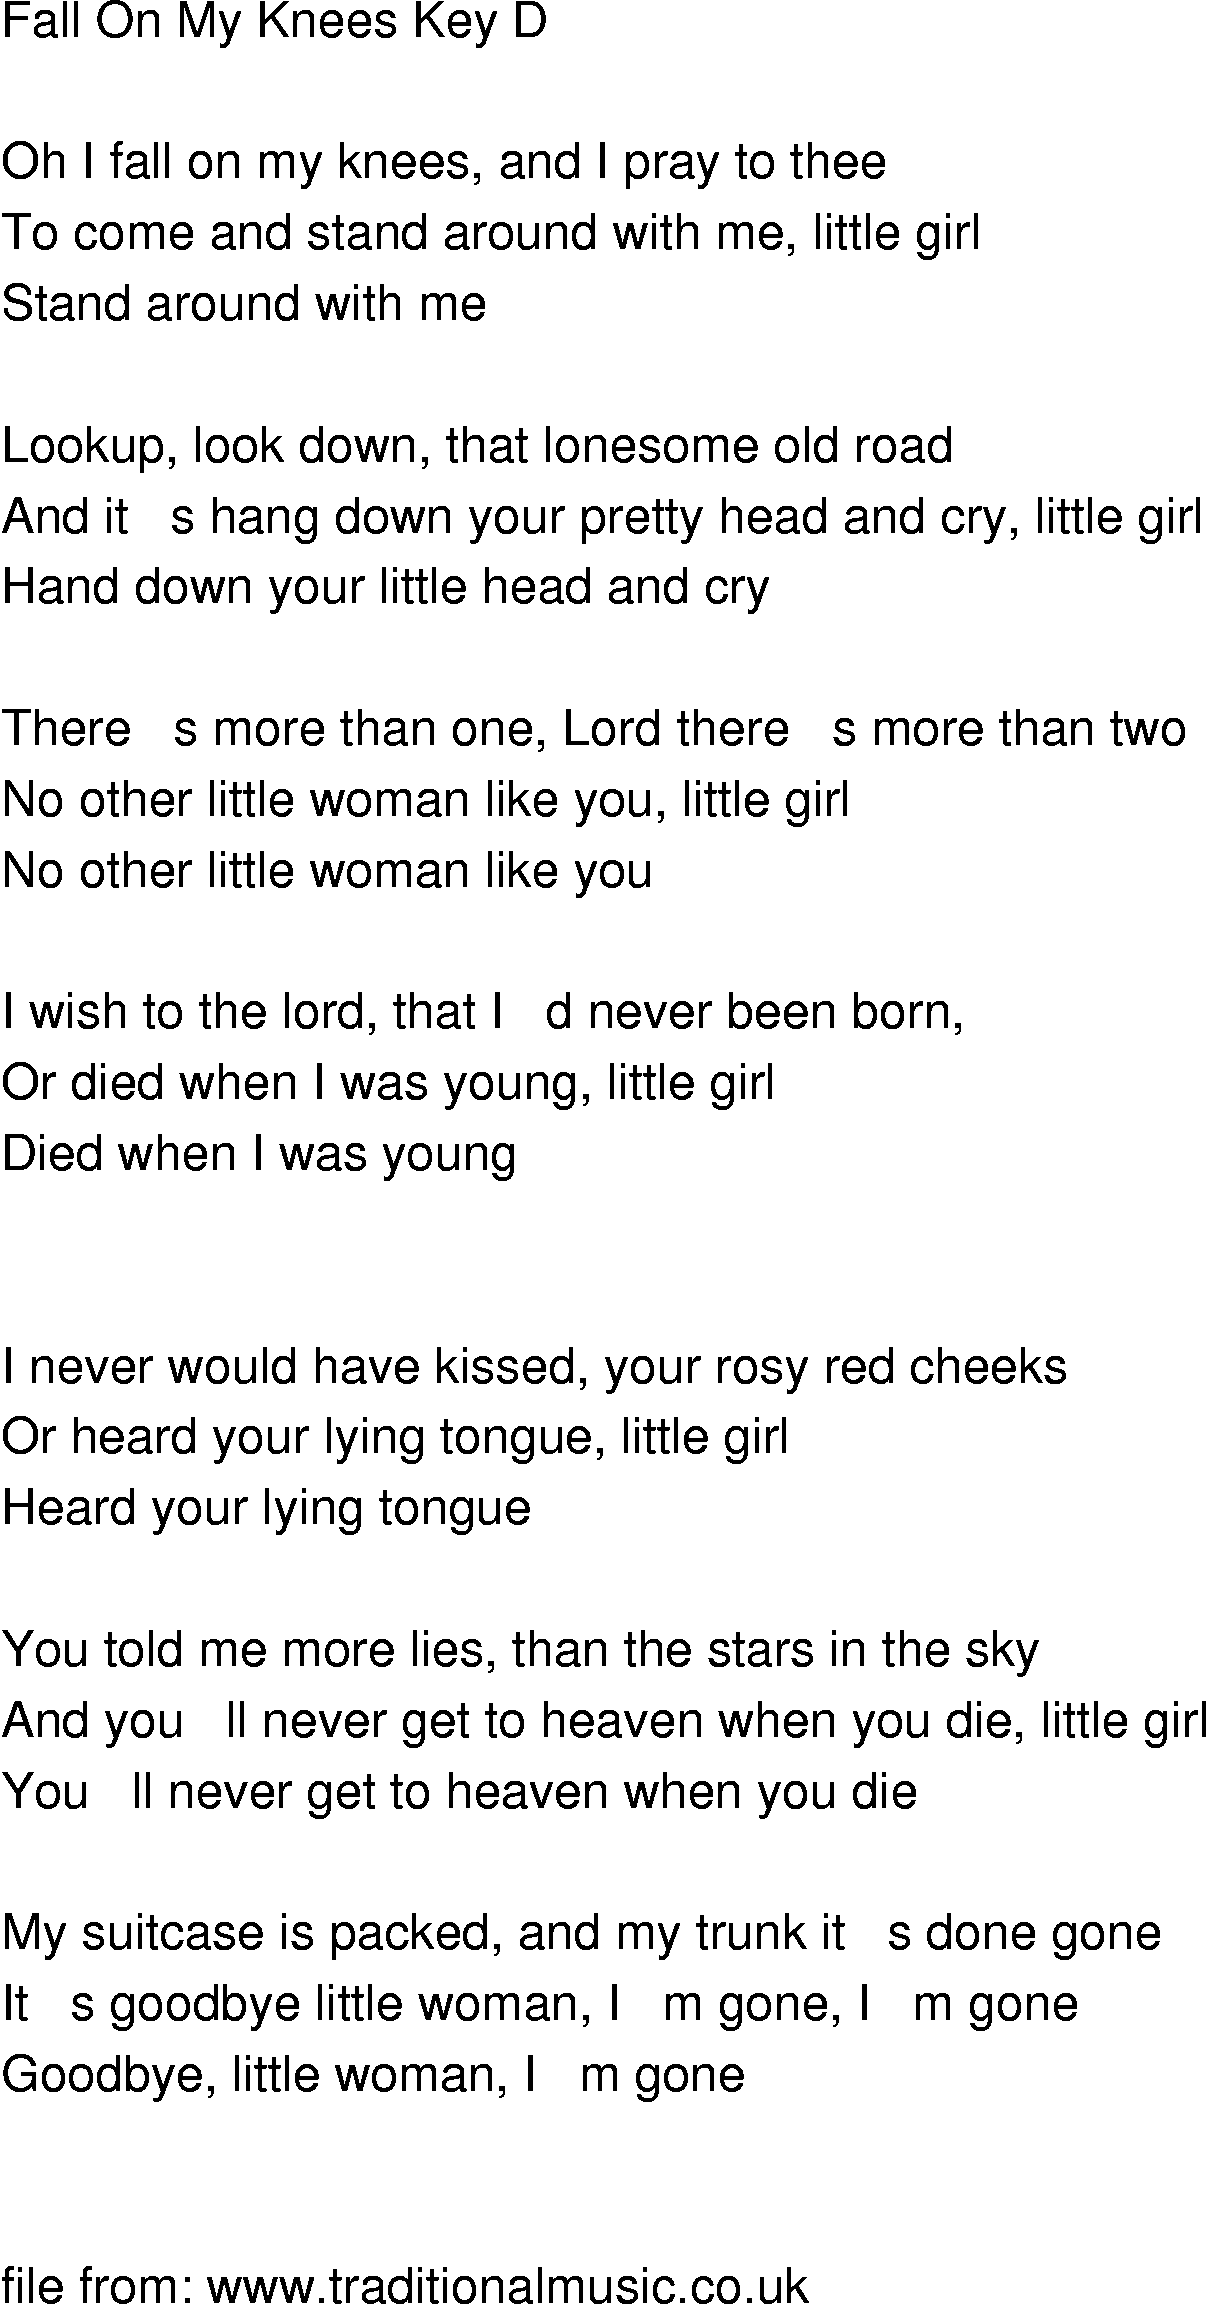 Old-Time Song Lyrics - Fall On My Knees